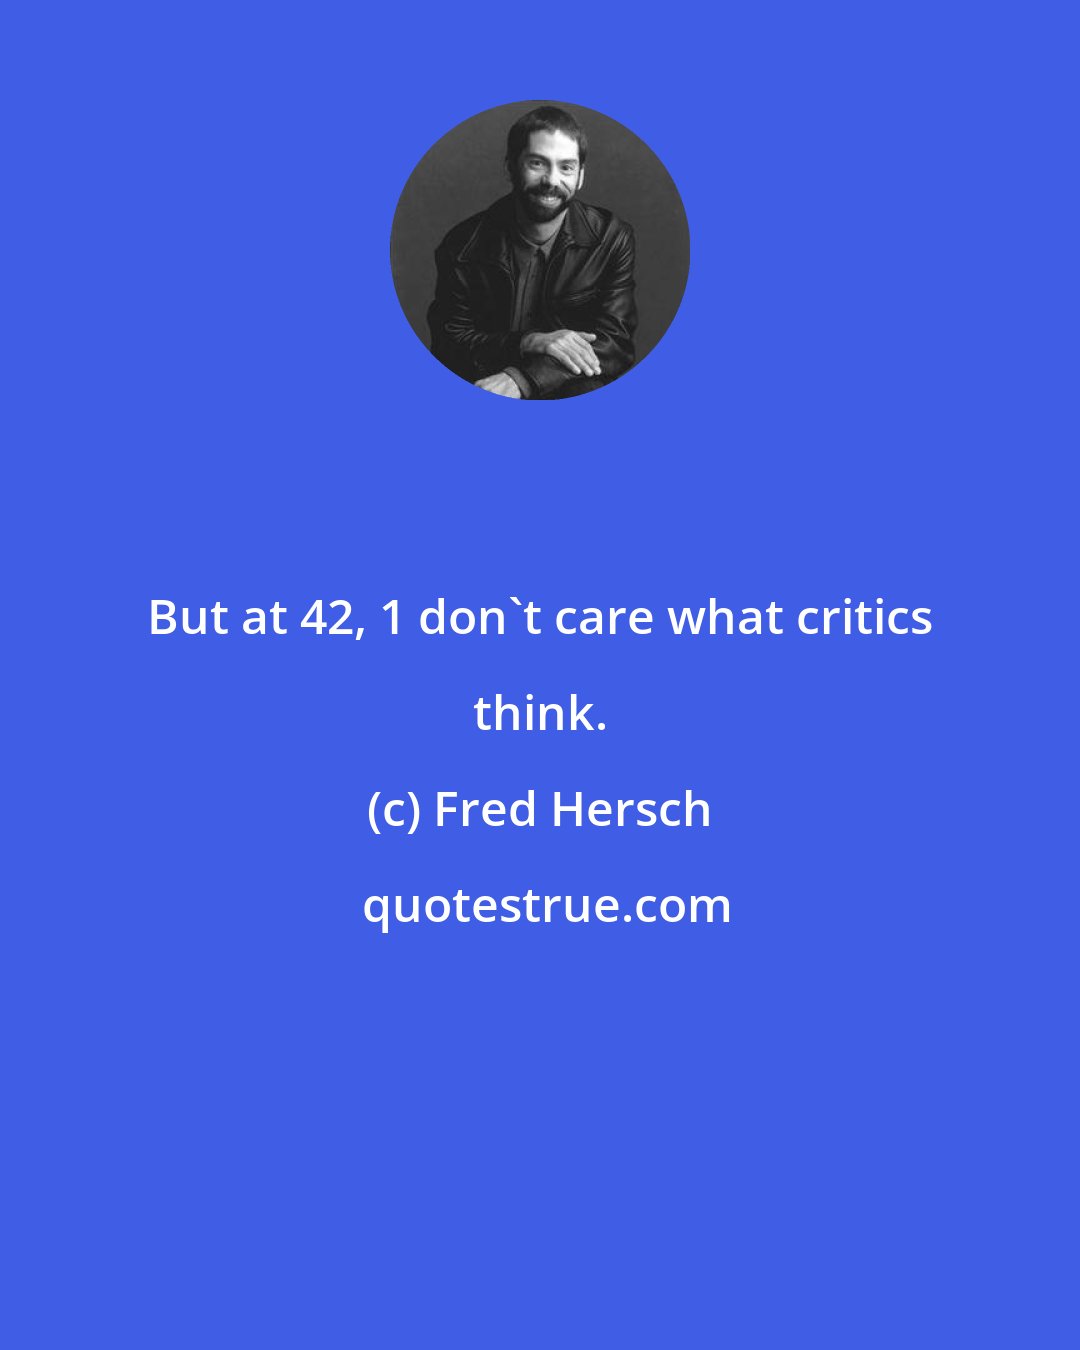 Fred Hersch: But at 42, 1 don't care what critics think.